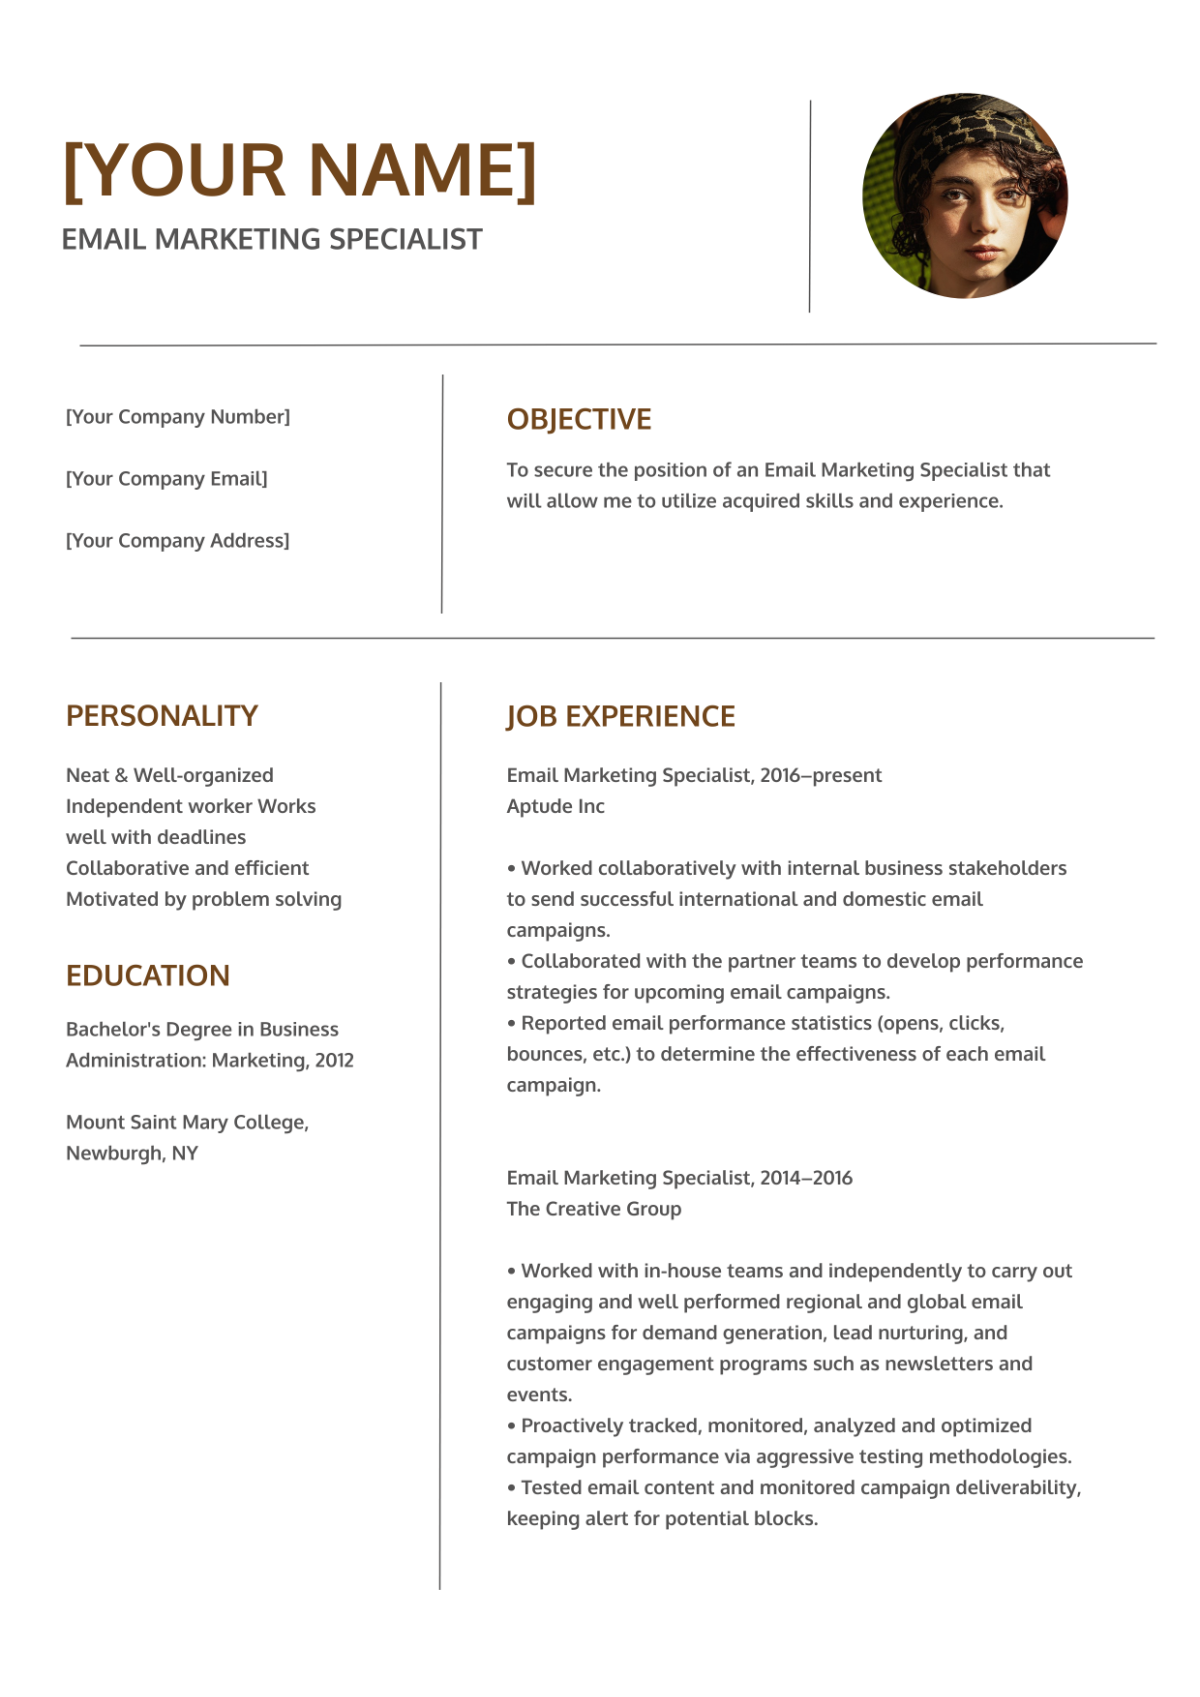 Email Marketing Specialist Resume